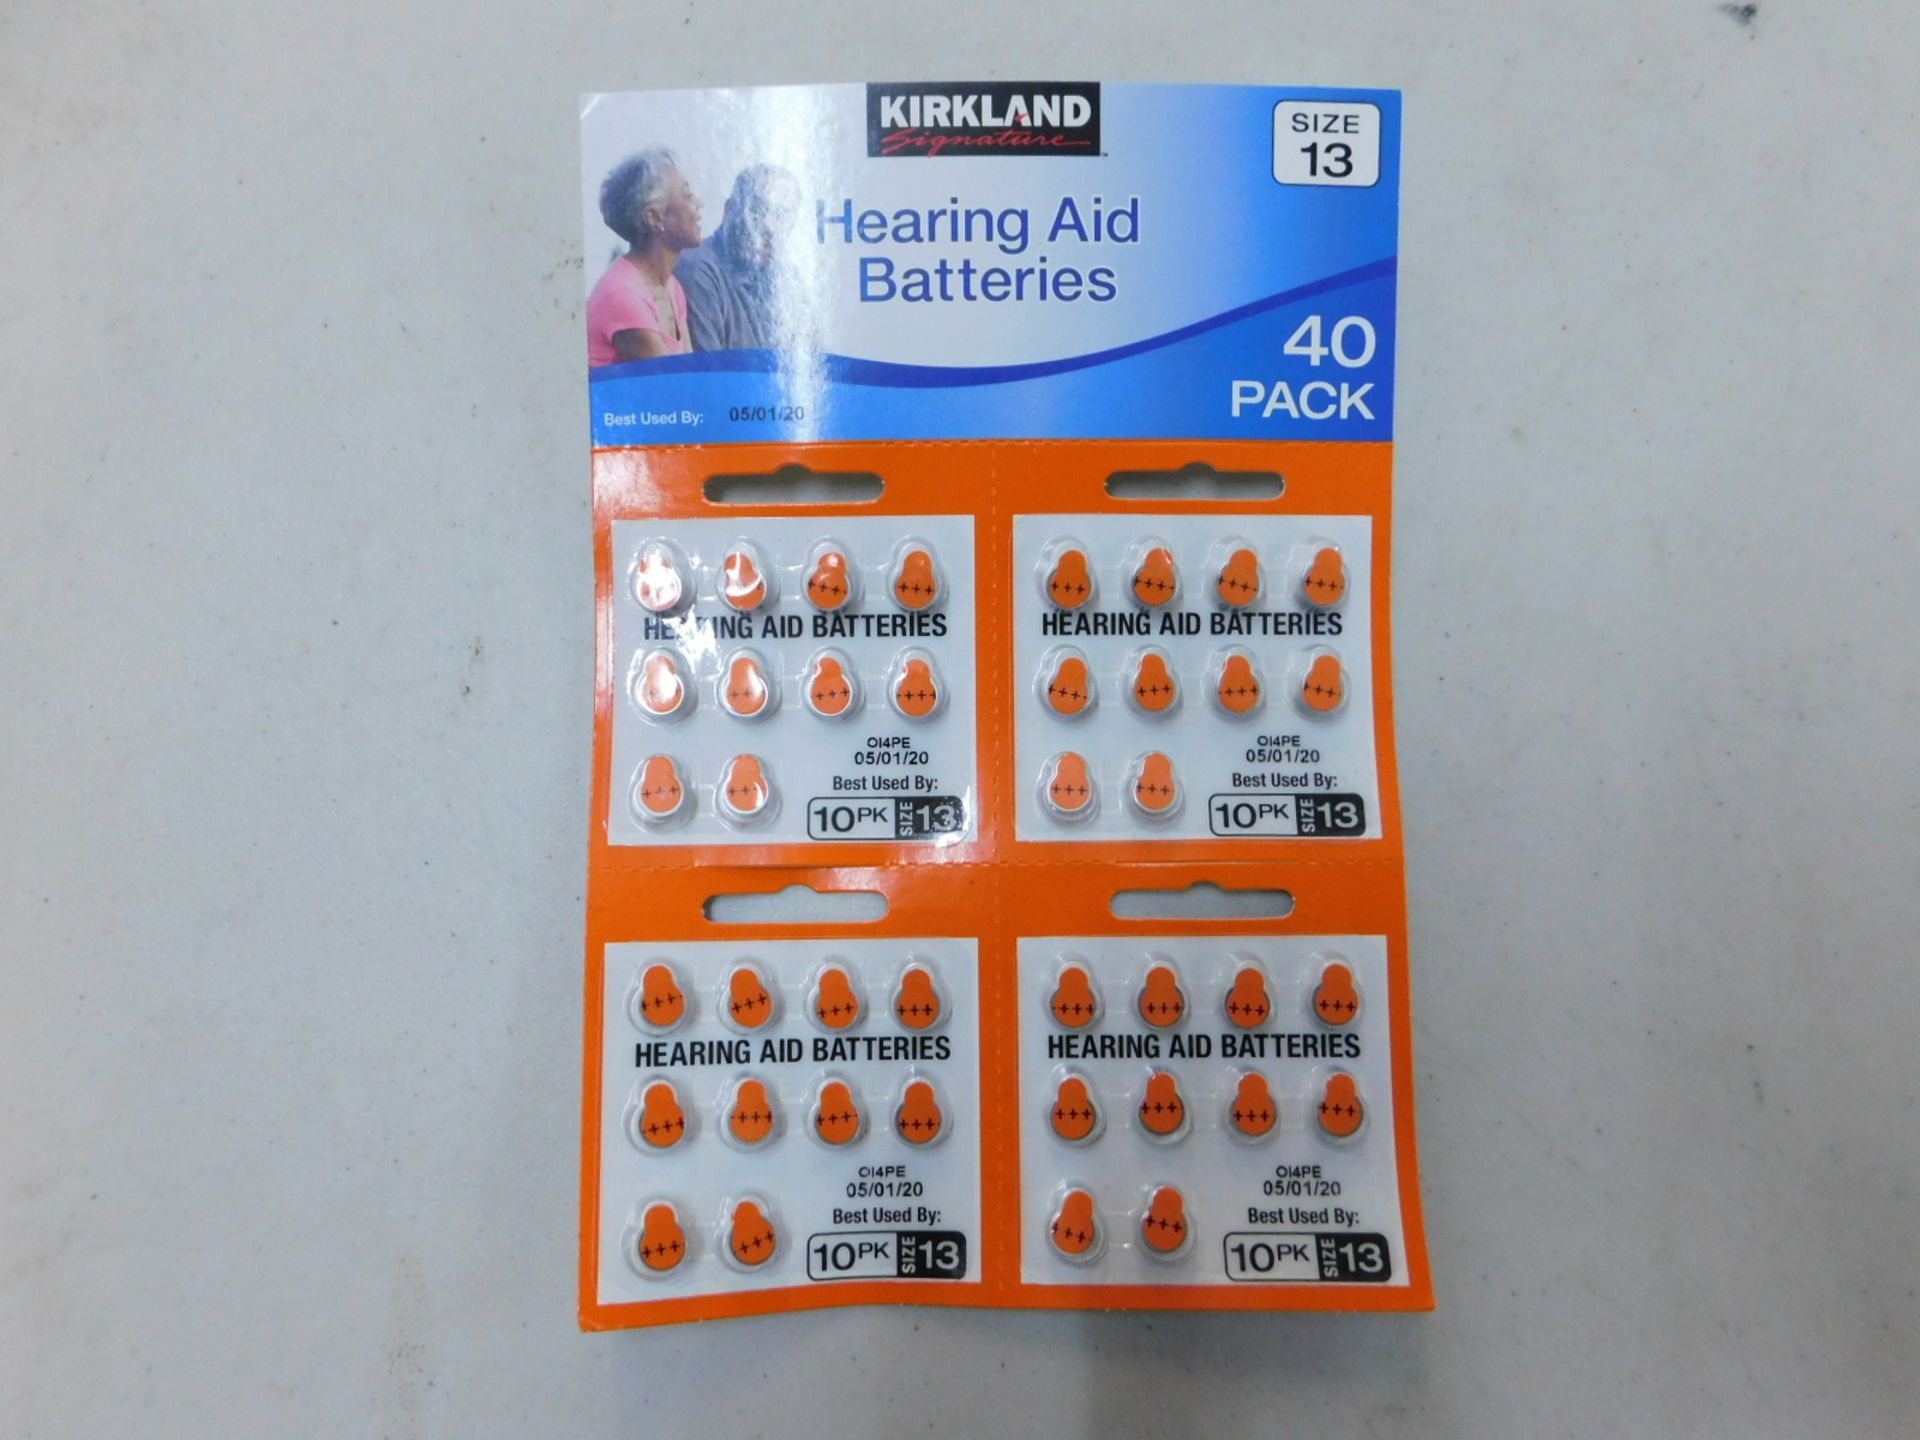 1 BRAND NEW PACK OF KIRKLAND SIGNATURE HEARING AID BATTERIES SIZE 13 RRP Â£19.99